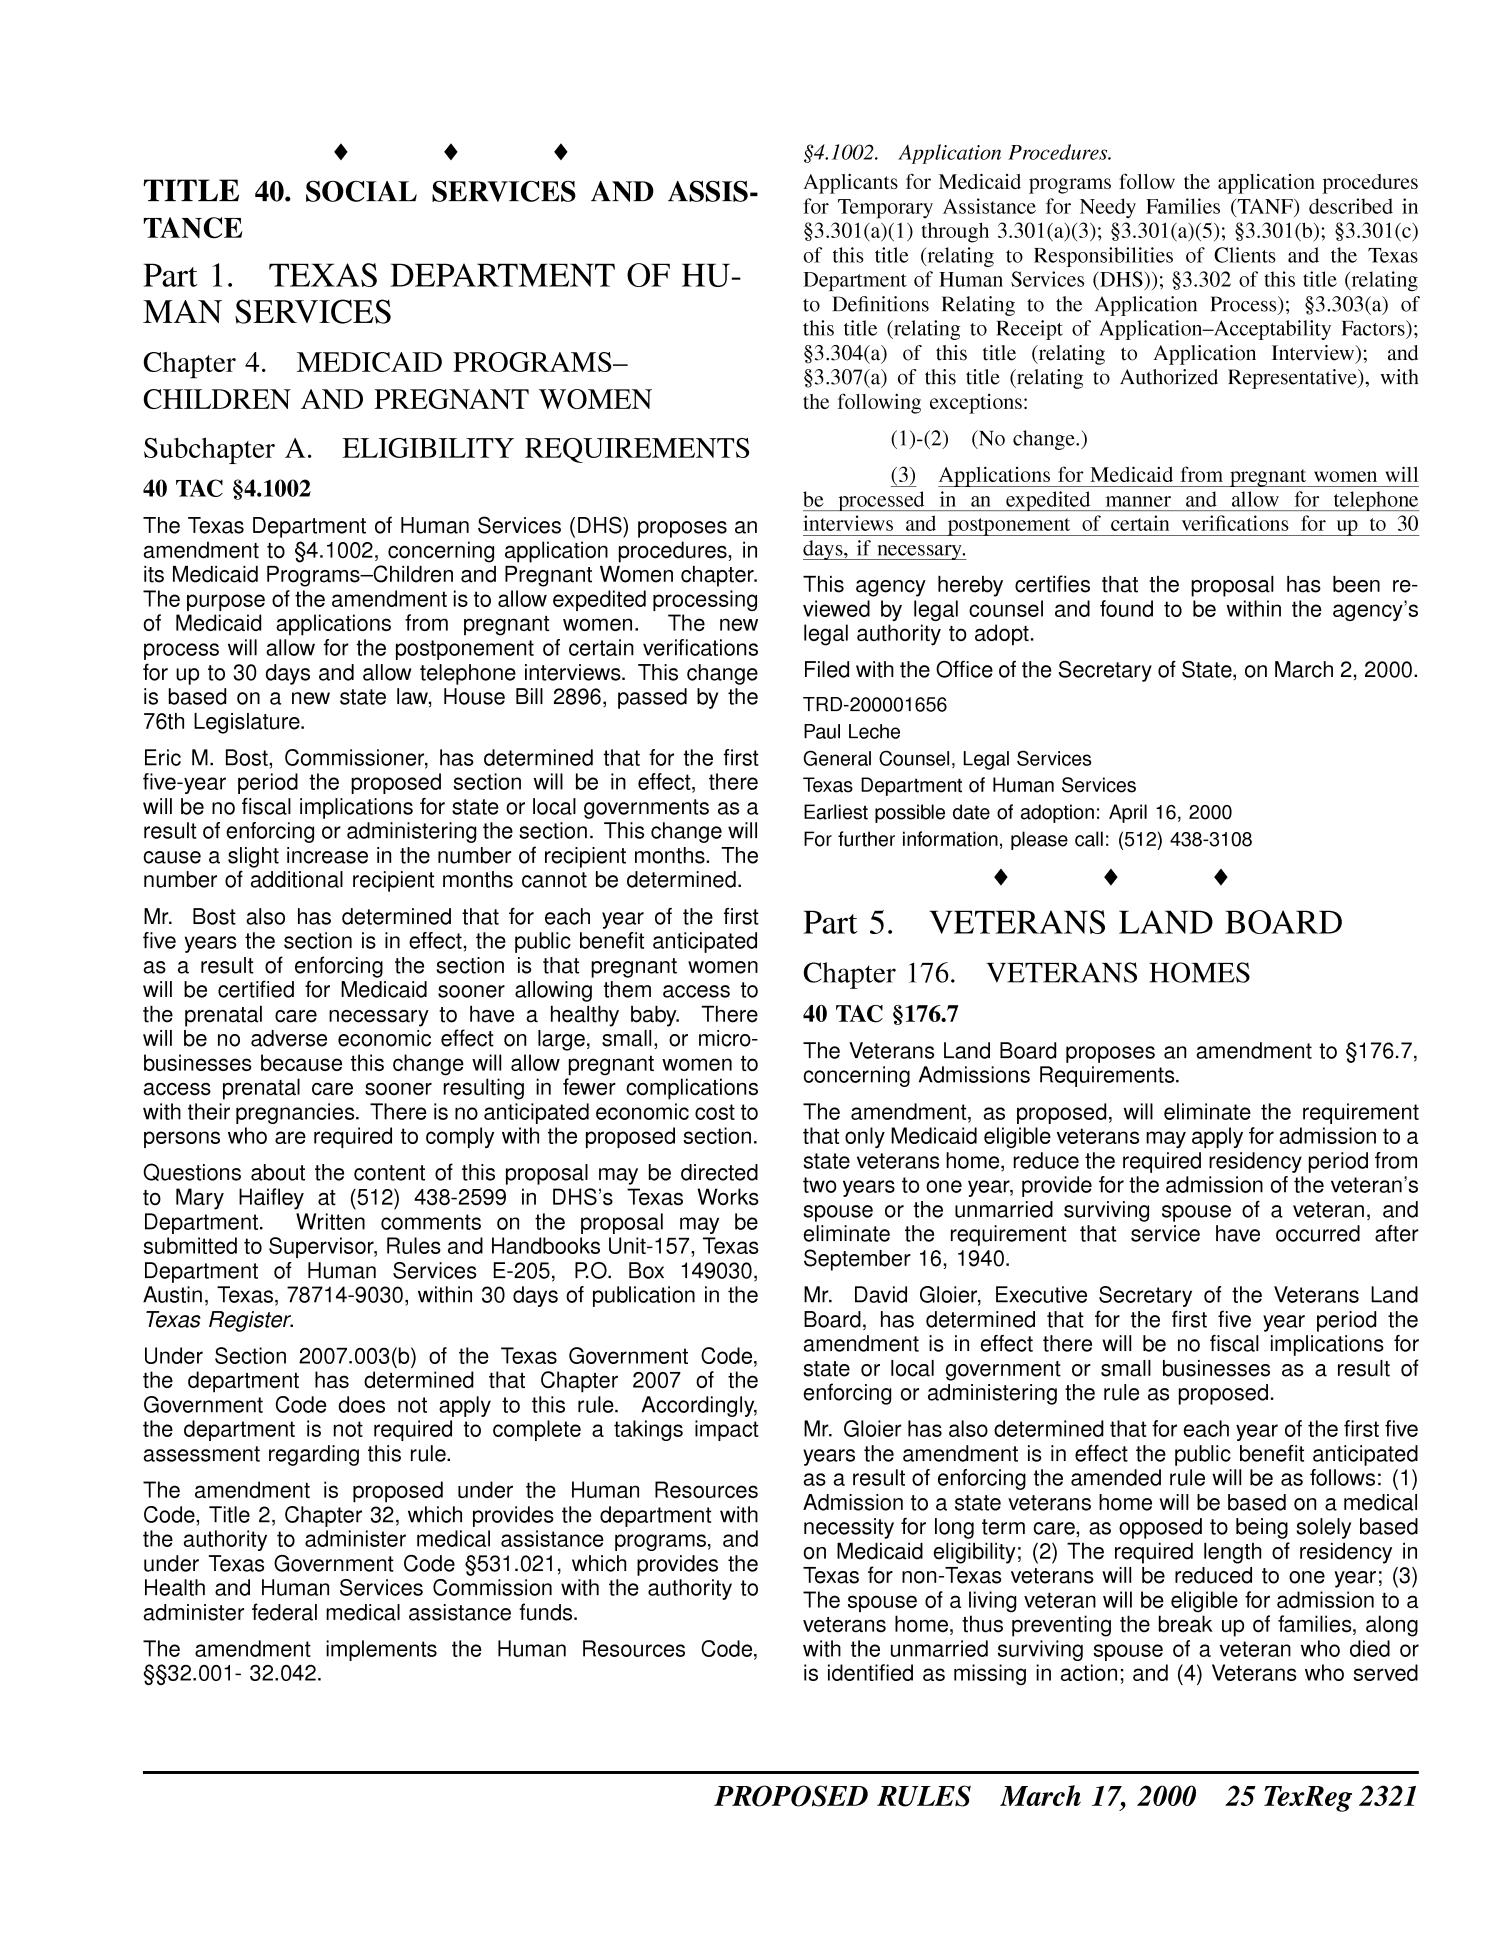 Texas Register, Volume 25, Number 11, Pages 2223-2484, March 17, 2000
                                                
                                                    2321
                                                